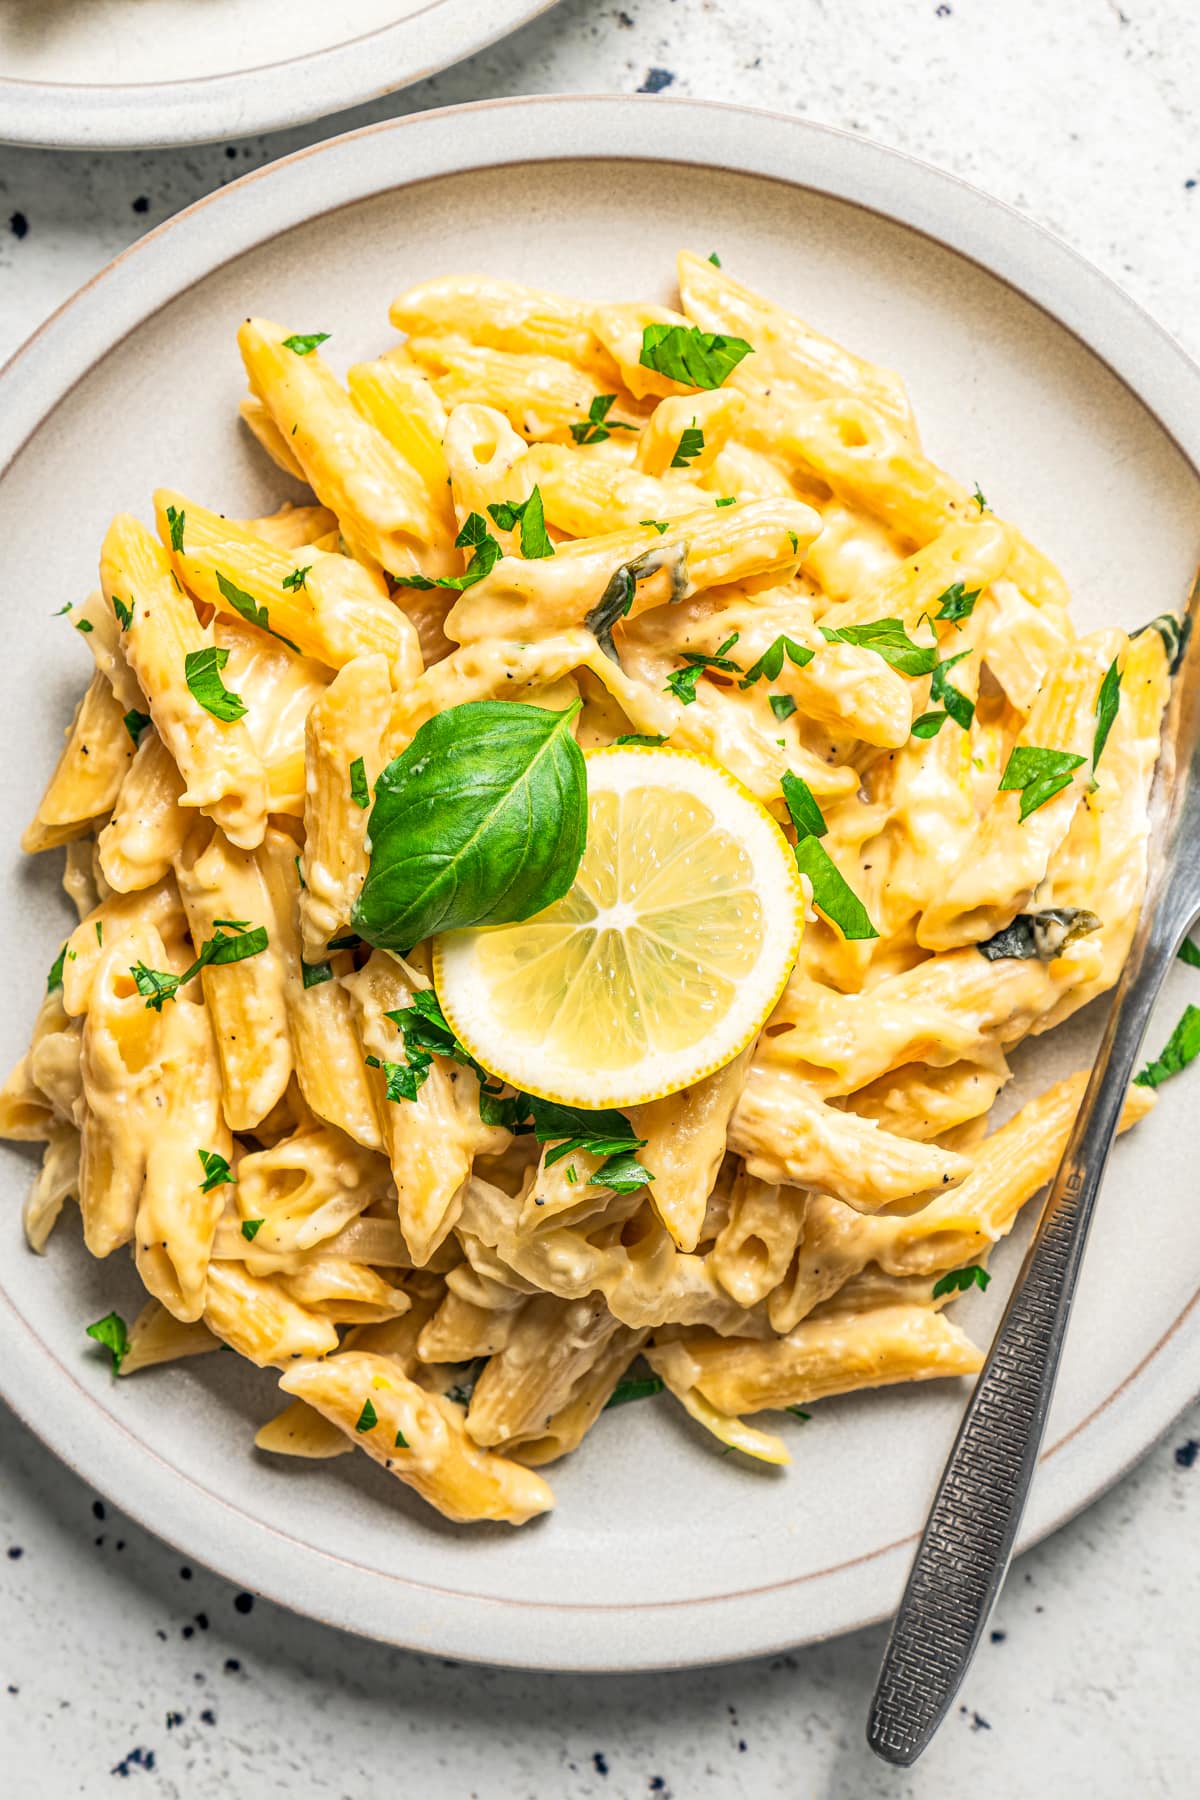 Bowl of lemon pasta recipe with a lemon slice and fresh parsley and basil on top.